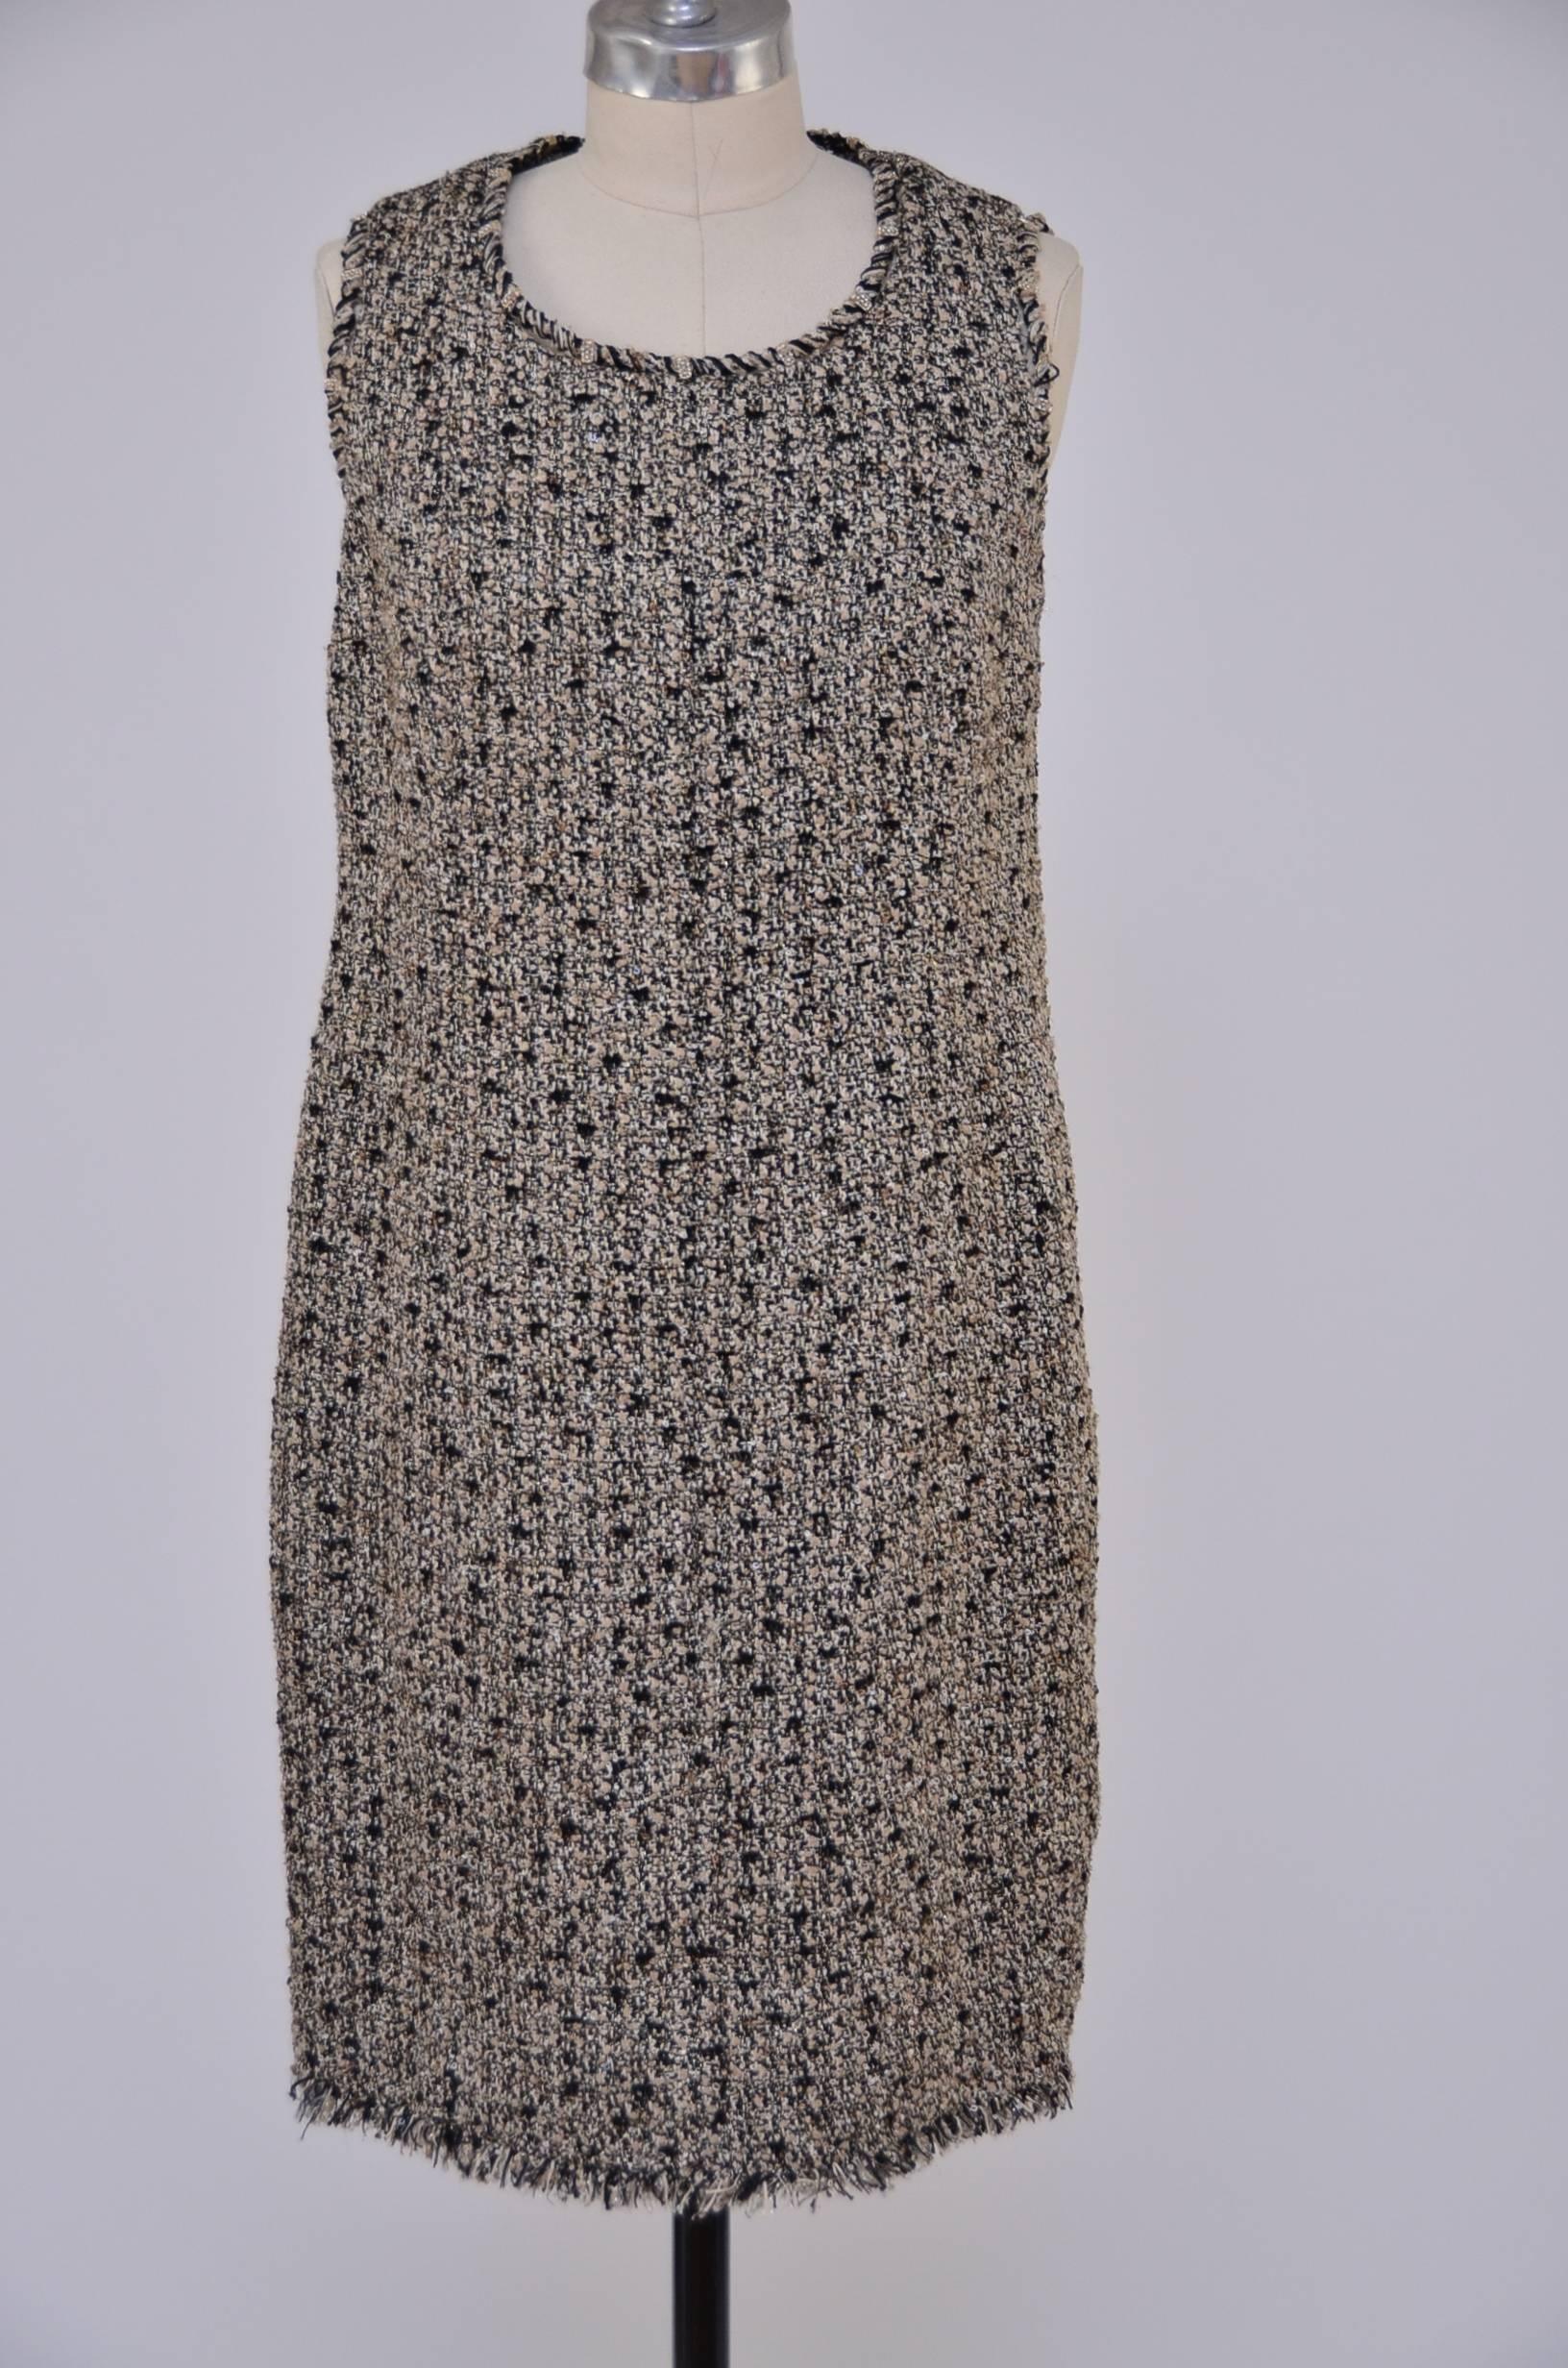 CHANEL Haute Couture Tweed Dress With Matching Jacket   Beautiful..... 2